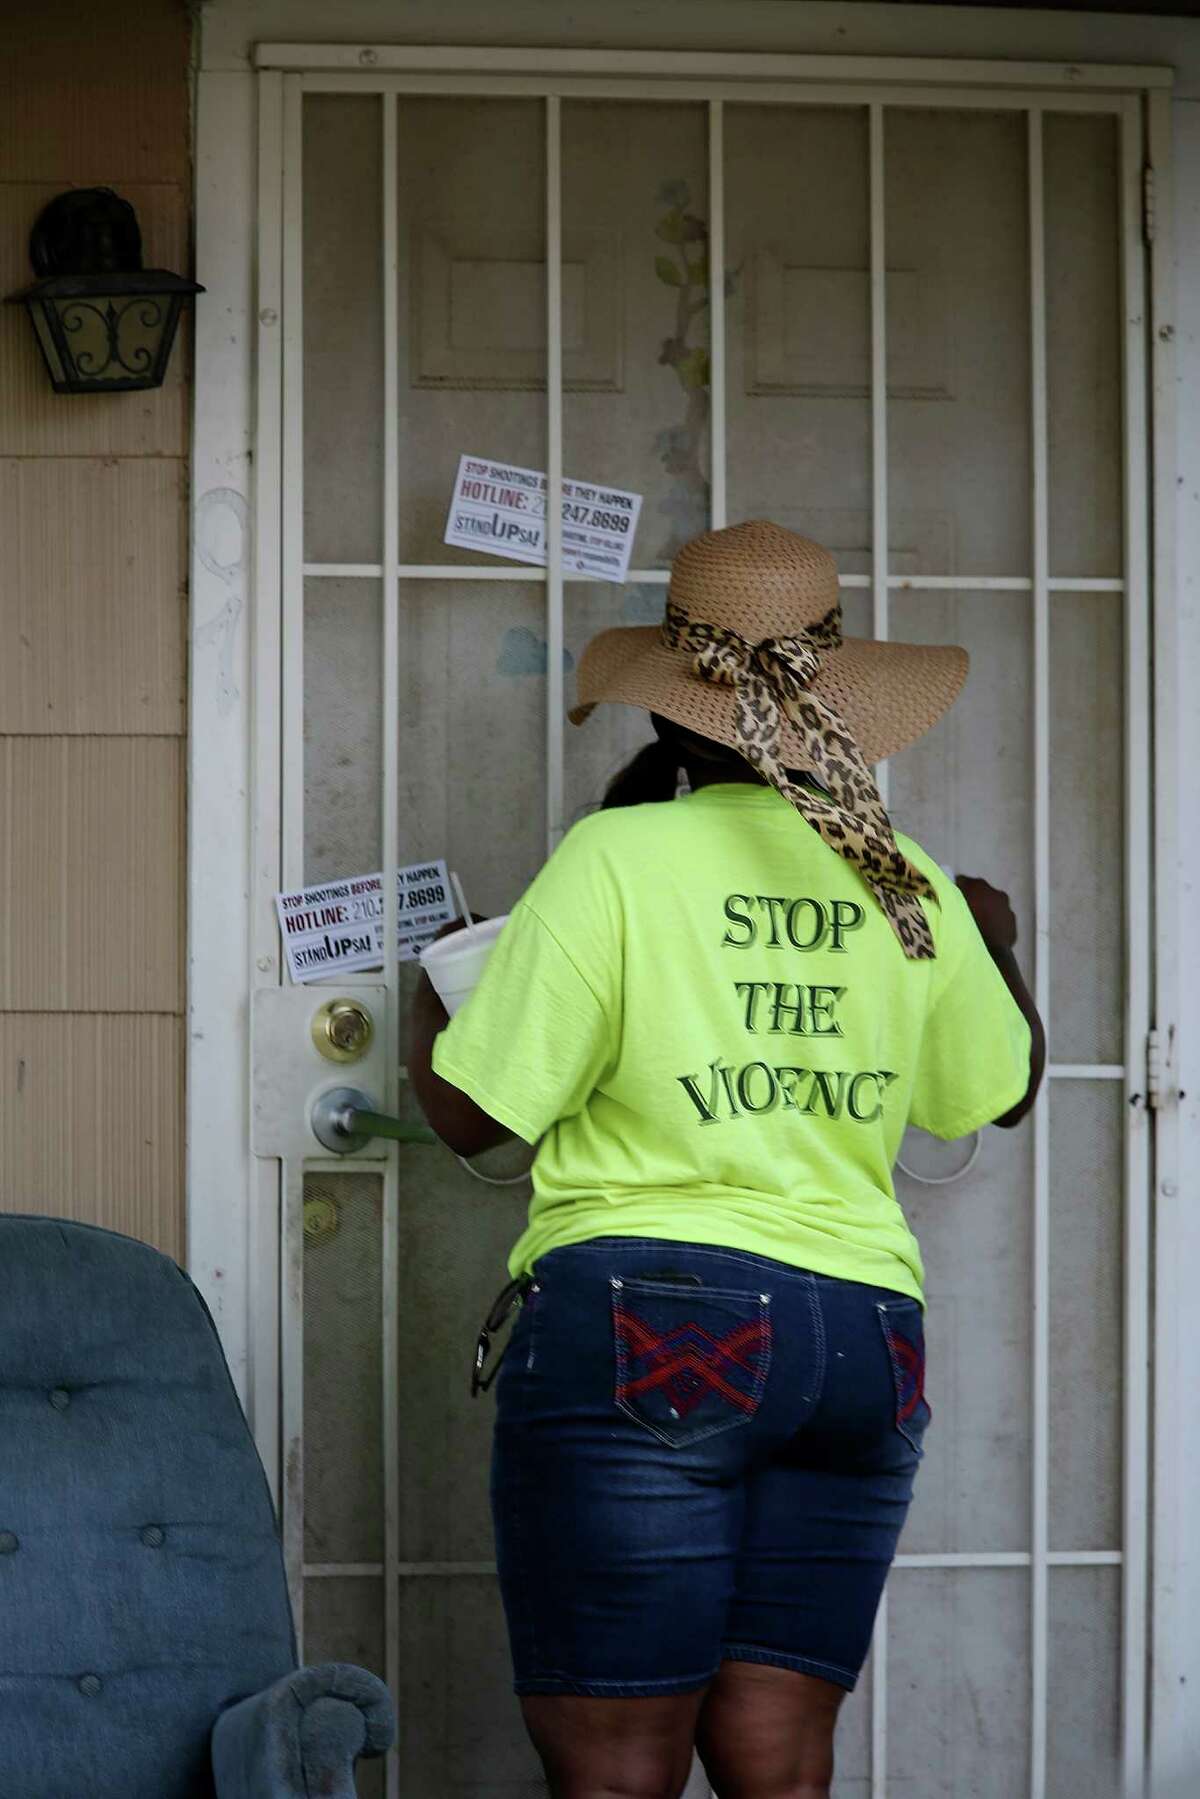 A member of the San Antonio Metropolitan Health District's violence prevention program, Stand Up S.A., places informational cards at the house where five-year-old Ana Garza lived on the 800 block of Pecan Valley, Wednesday, June 8, 2016. Garza and her relative, Carlos Aguilar, were shot on June 1 at the house. She died today. The young girl was asleep in the house when the shooting occurred and a bullet hit her on the head.